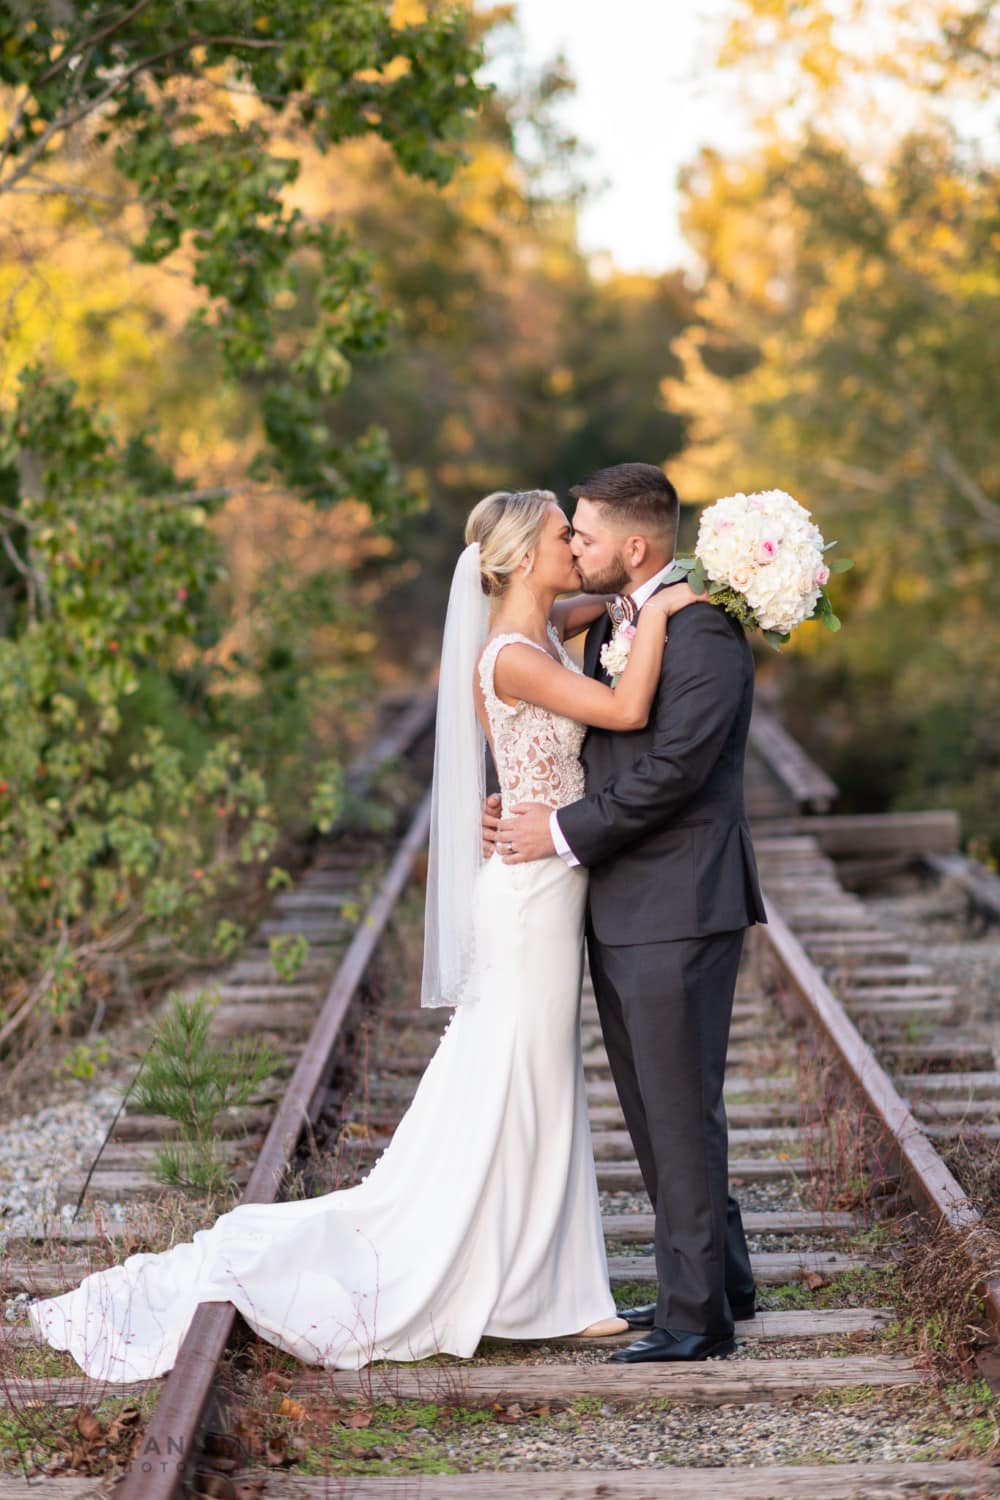 Kiss on the train tracks - Conway River Walk